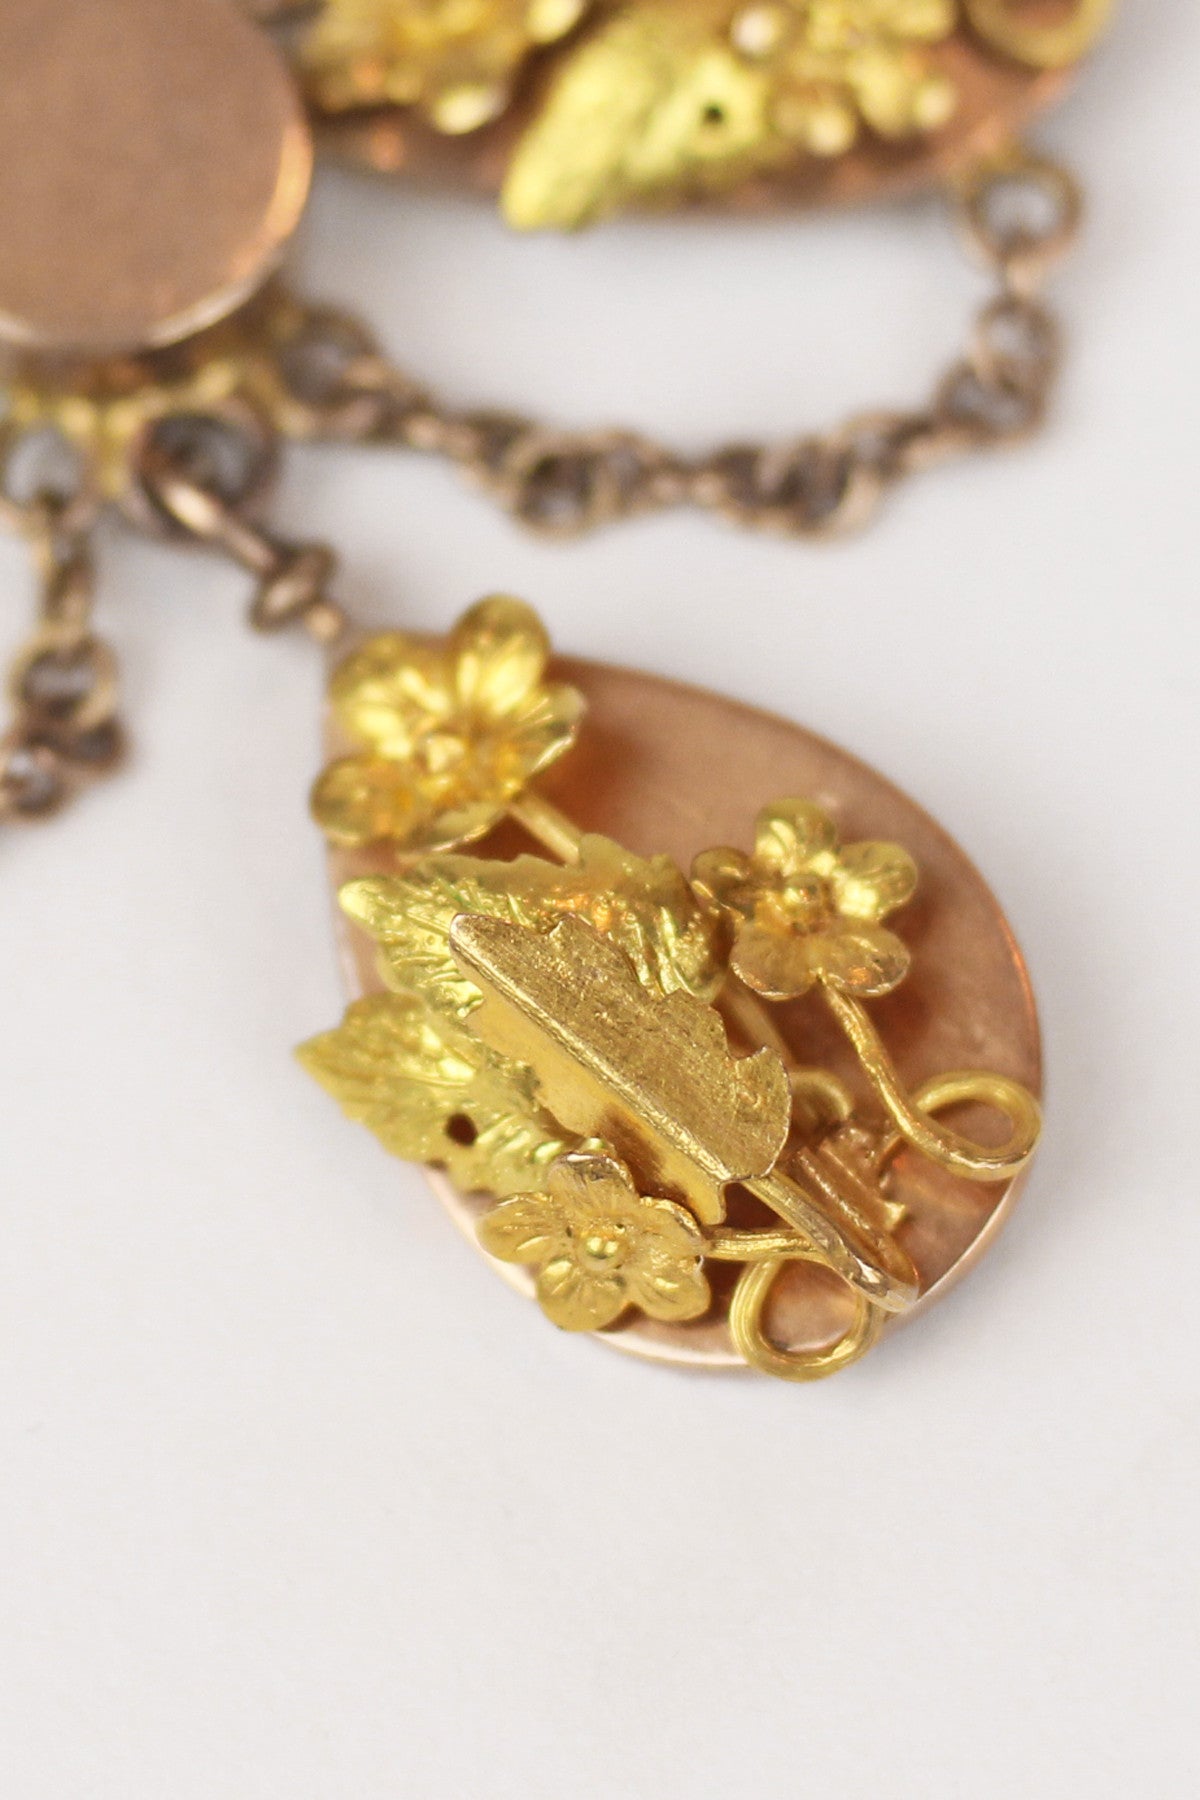 Antique 1900s-1920s 14K Gold Mexican Necklace